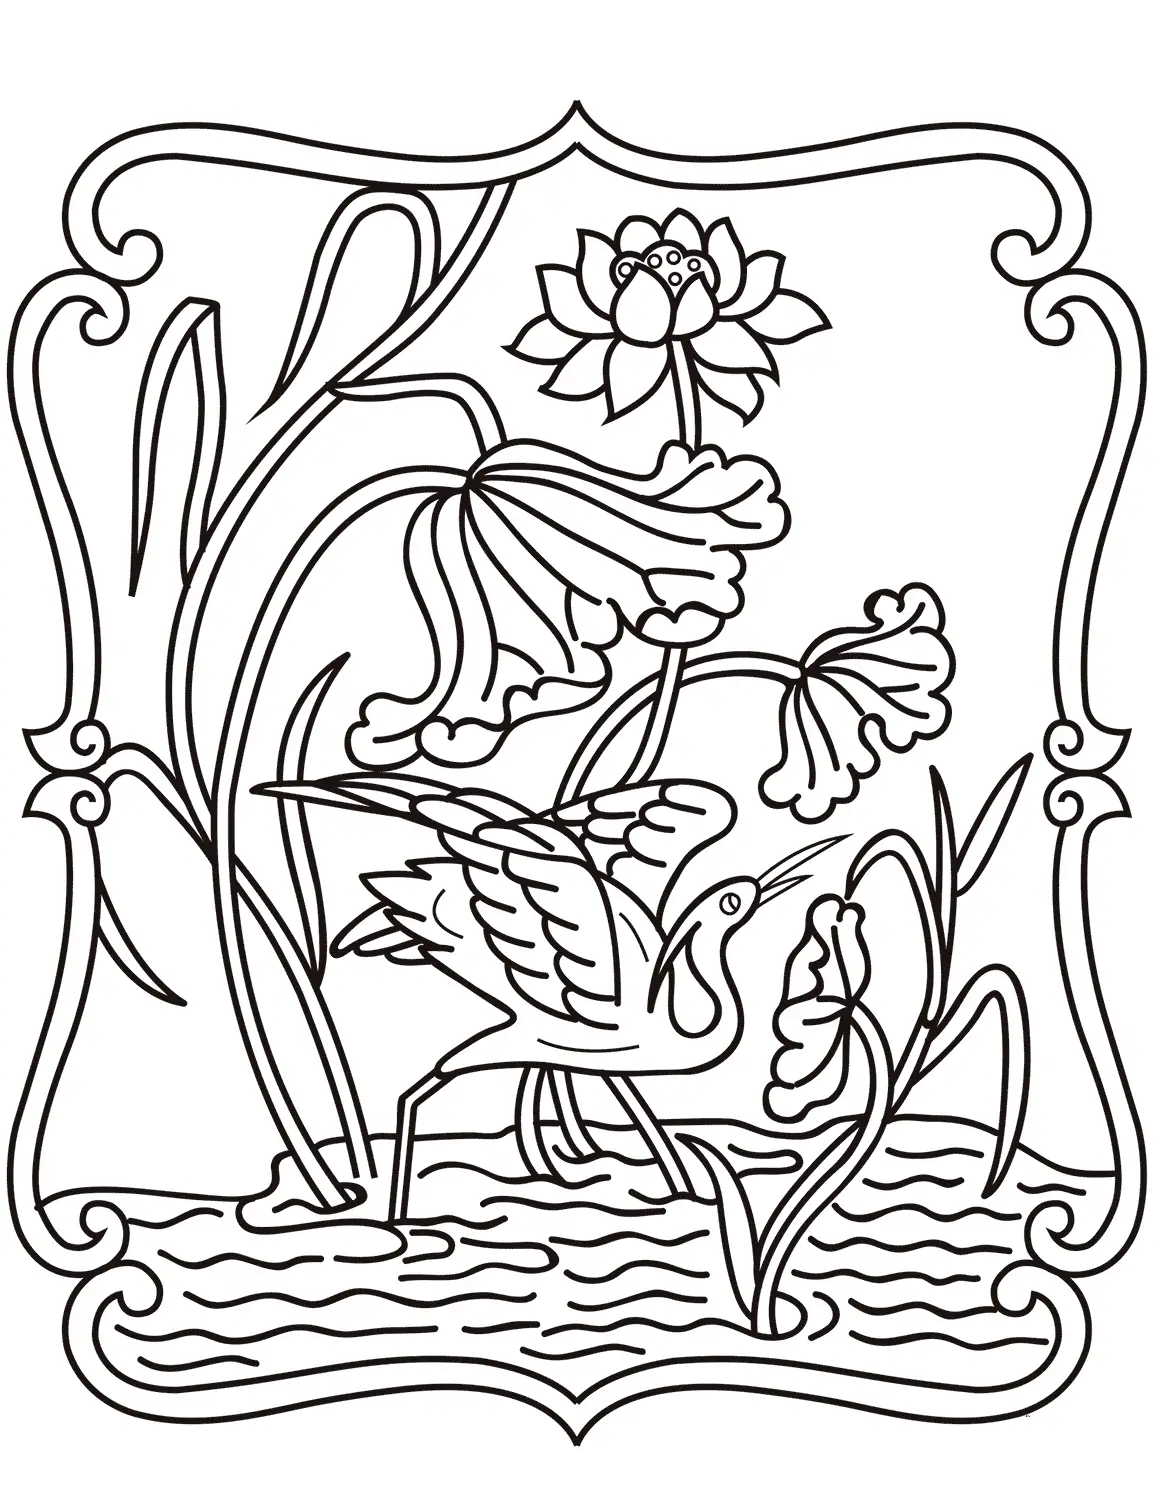 CHINESE EGRET BIRD Traditional Beautiful Mandala Coloring Pages for Kids Adults Boredom Art Activities Line Art